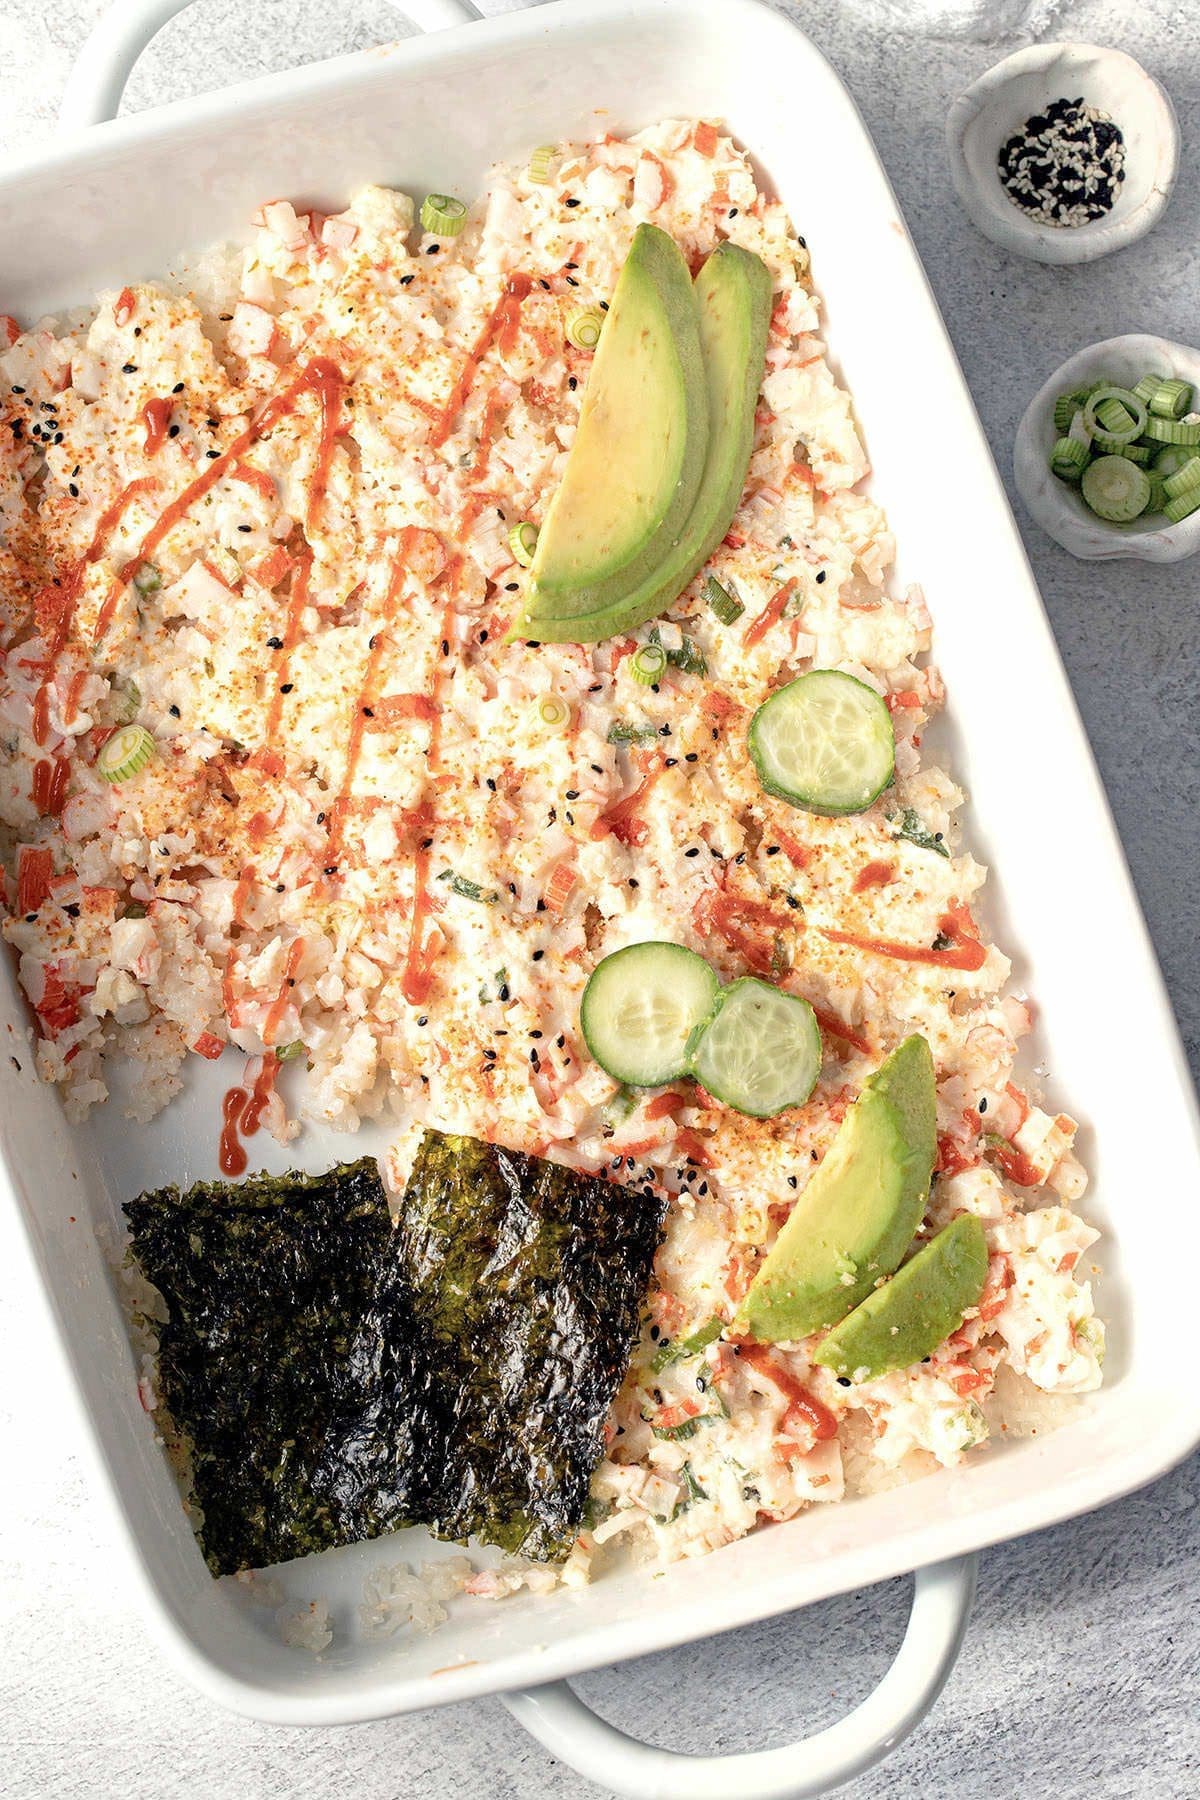 Seaweed casserole with avocado and cucumber.